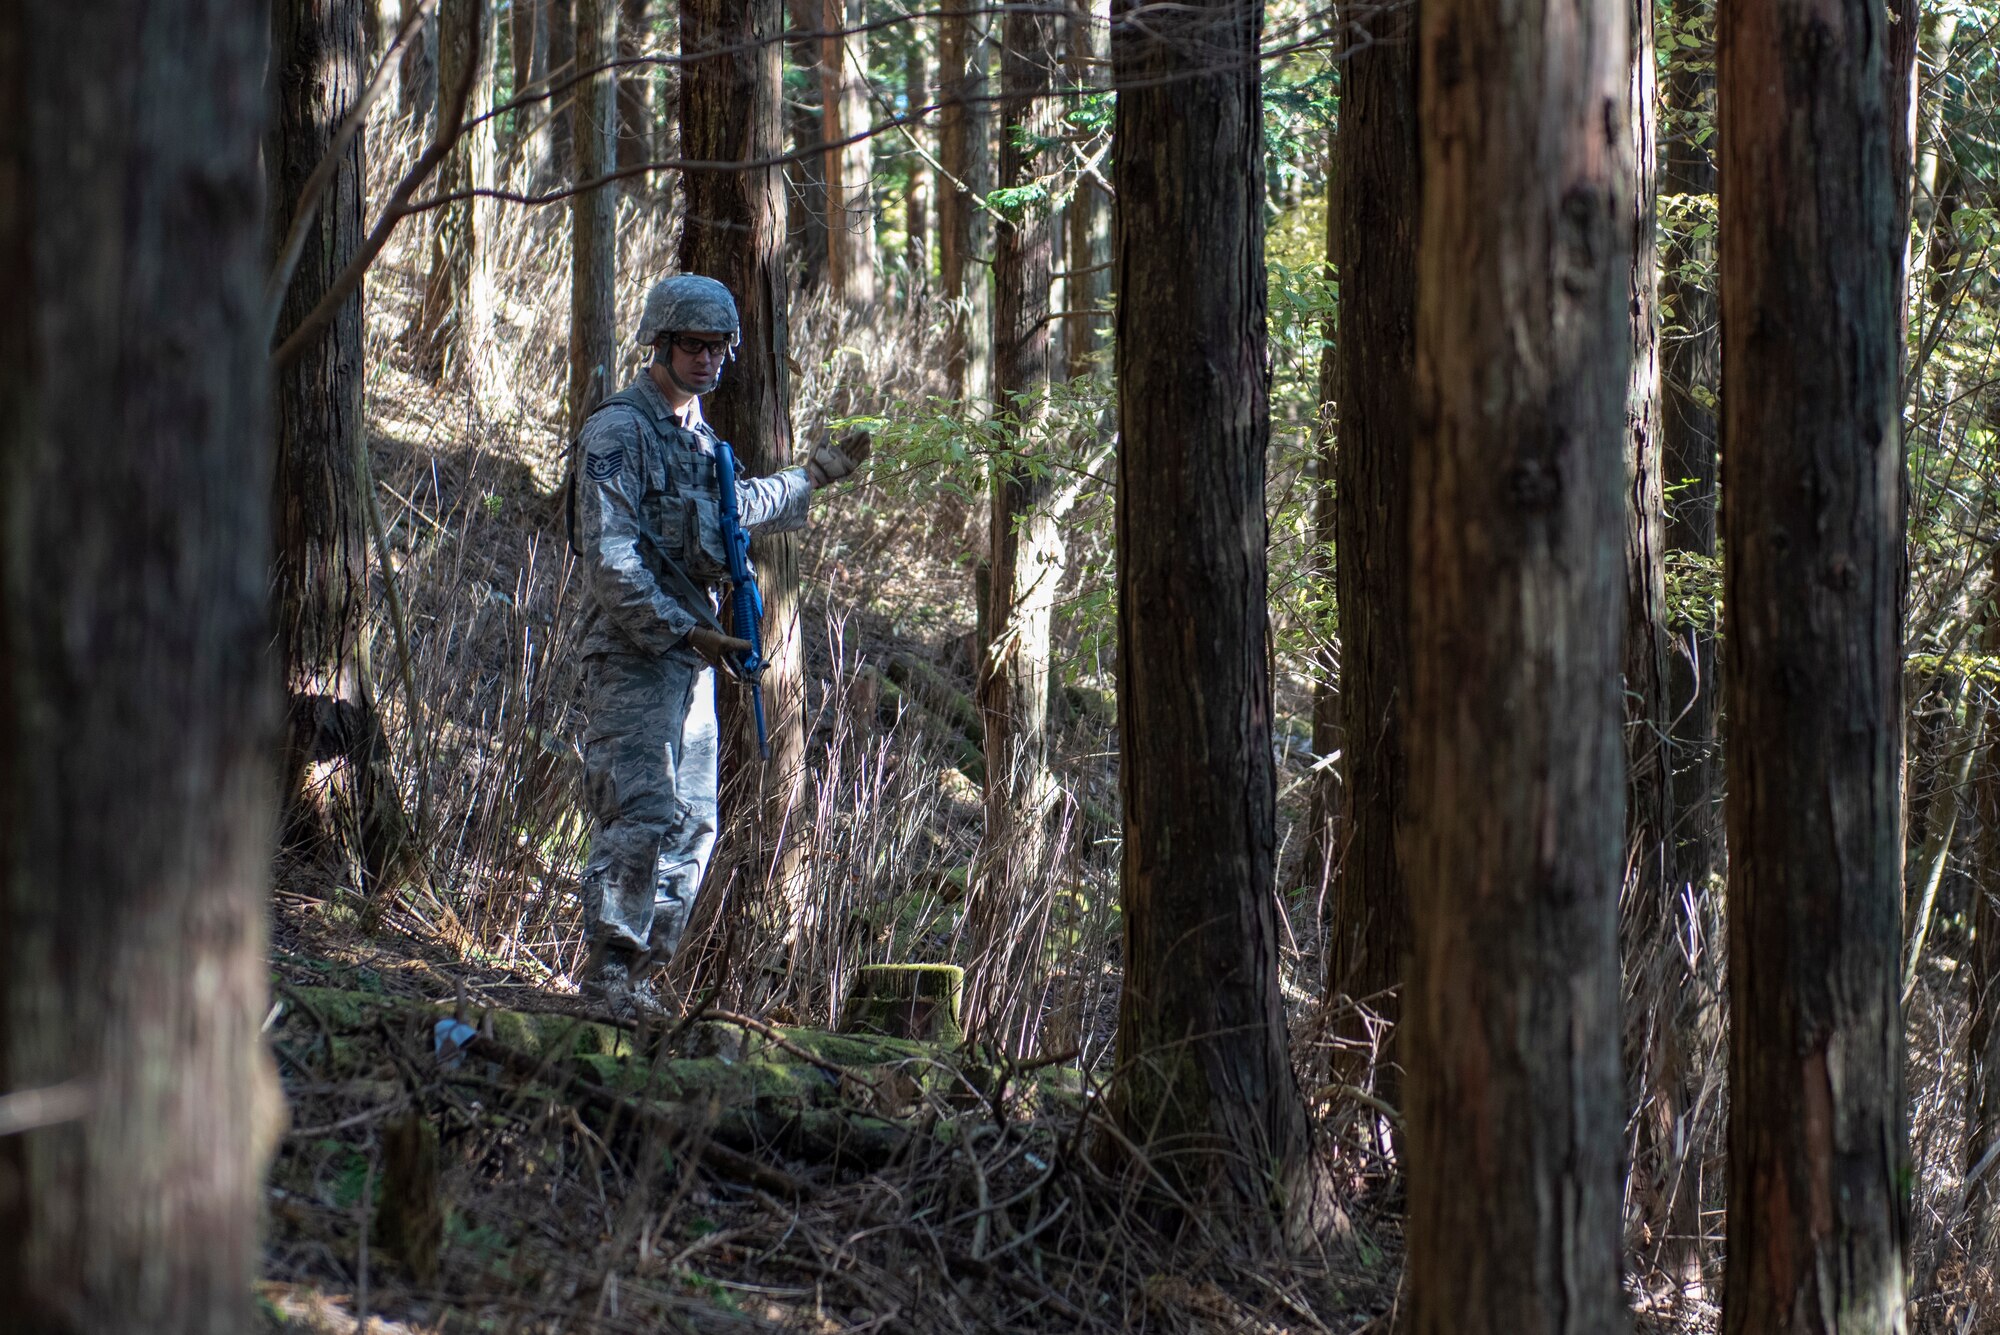 U.S. Air Force Tech. Sgt. Justin Hamilton, 374th Security Forces Squadron flight chief, motions to his team to follow during a field training exercise at Camp Fuji, Japan, Nov. 8, 2018.